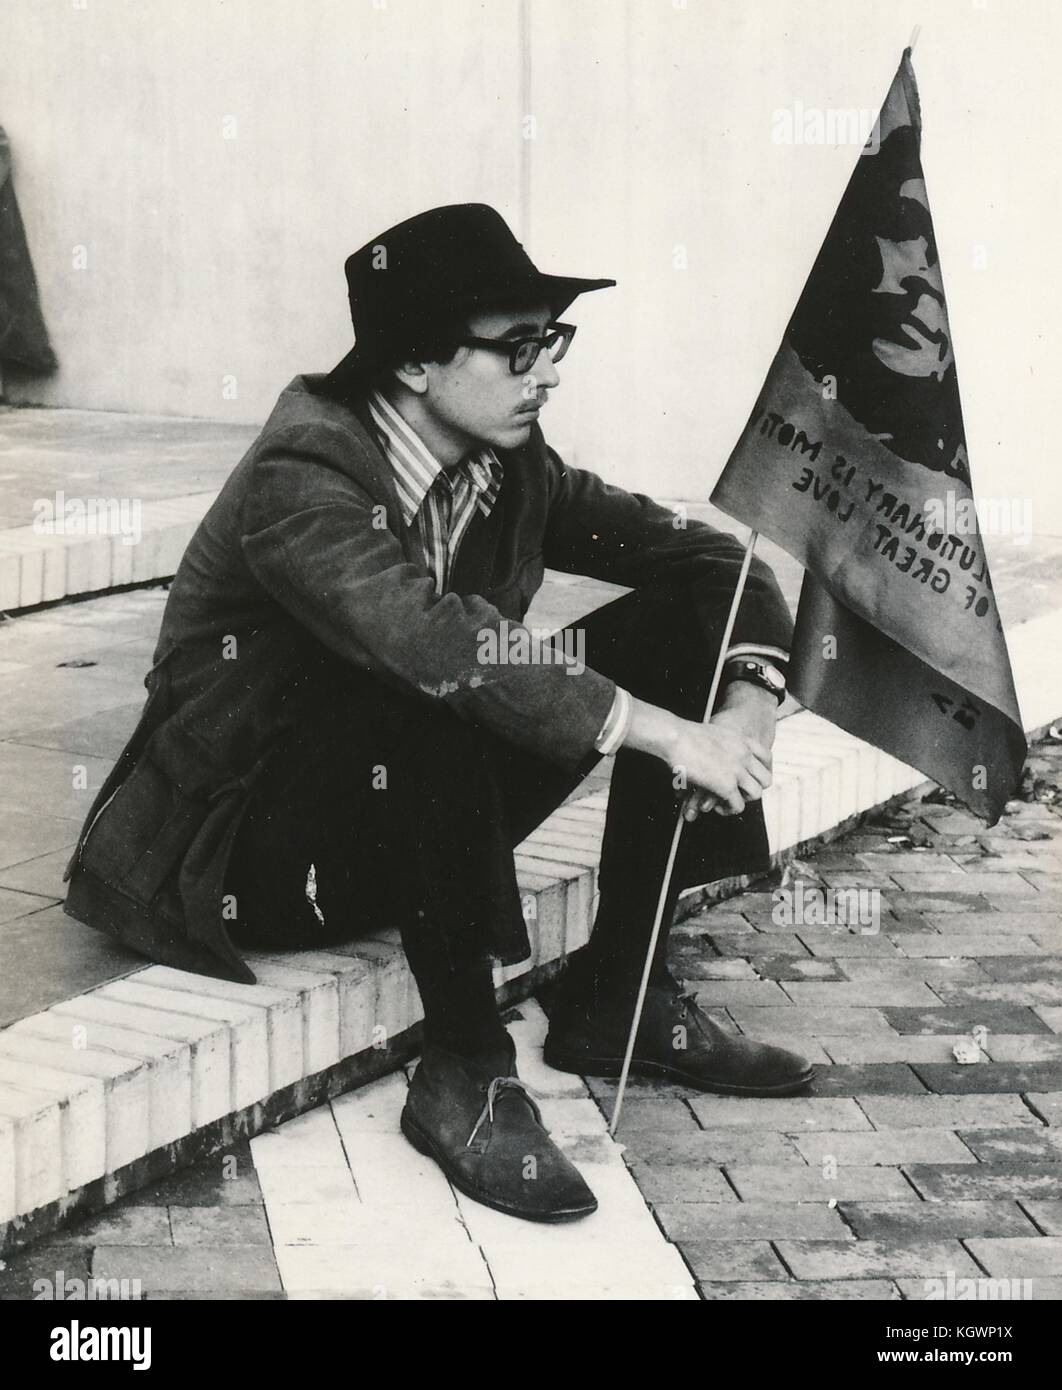 A male student wearing hippie attire, including thick glasses and a fedora hat, sits on a step and holds a flag with the face of revolutionary Che Guevara during an anti Vietnam War student sit-in protest at North Carolina State University, Raleigh, North Carolina, 1970. () Stock Photo